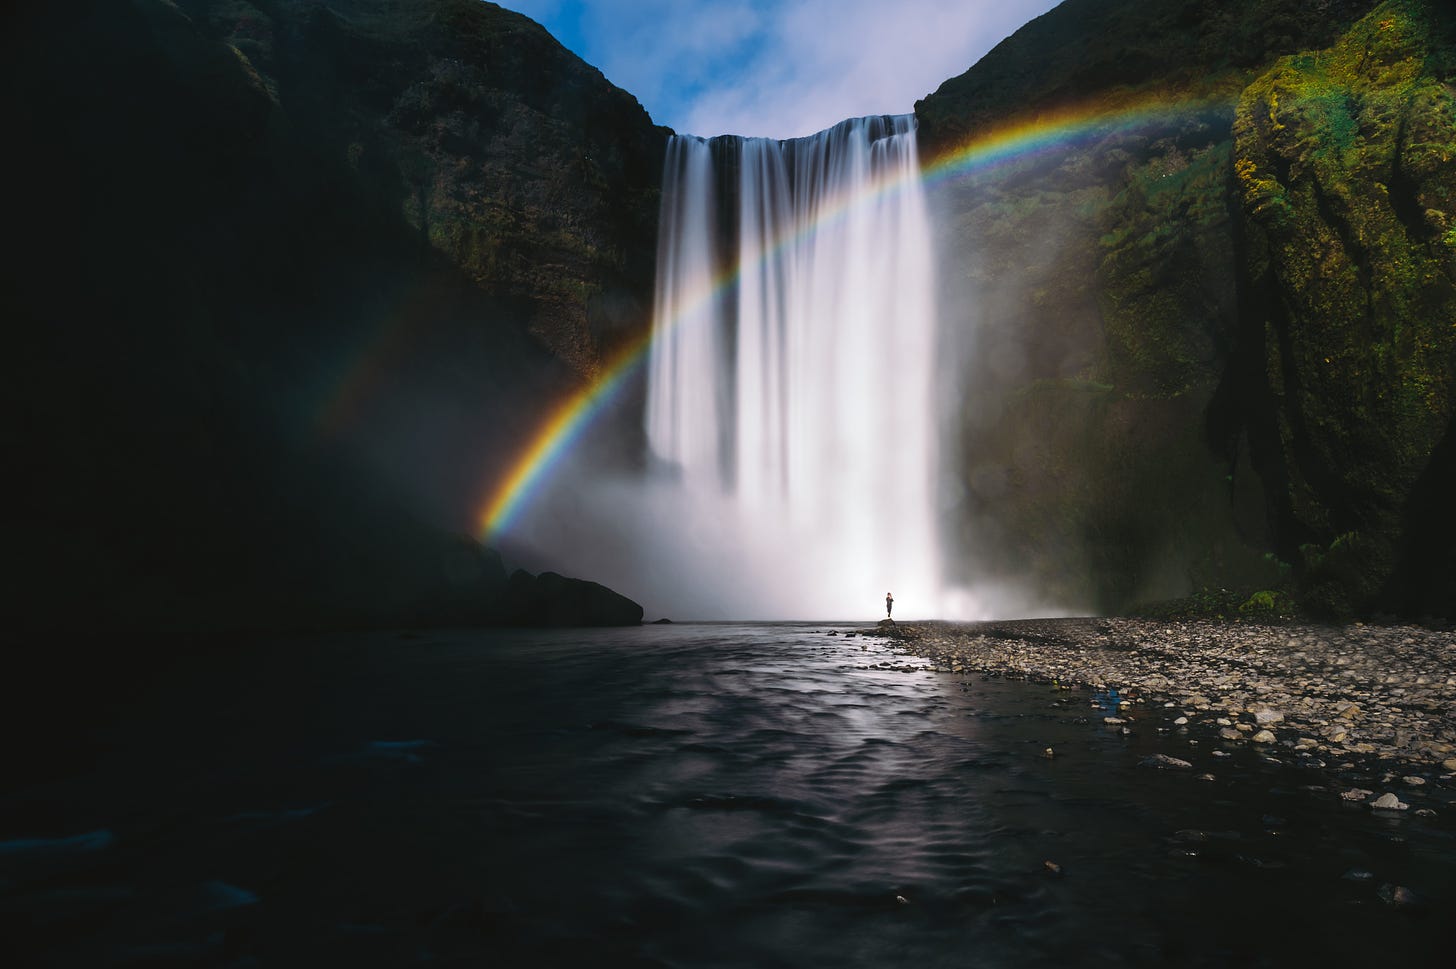 A scenic photo of a waterfall, with a rainbow behind it. A lone figure stands at the bottom of the waterfall.